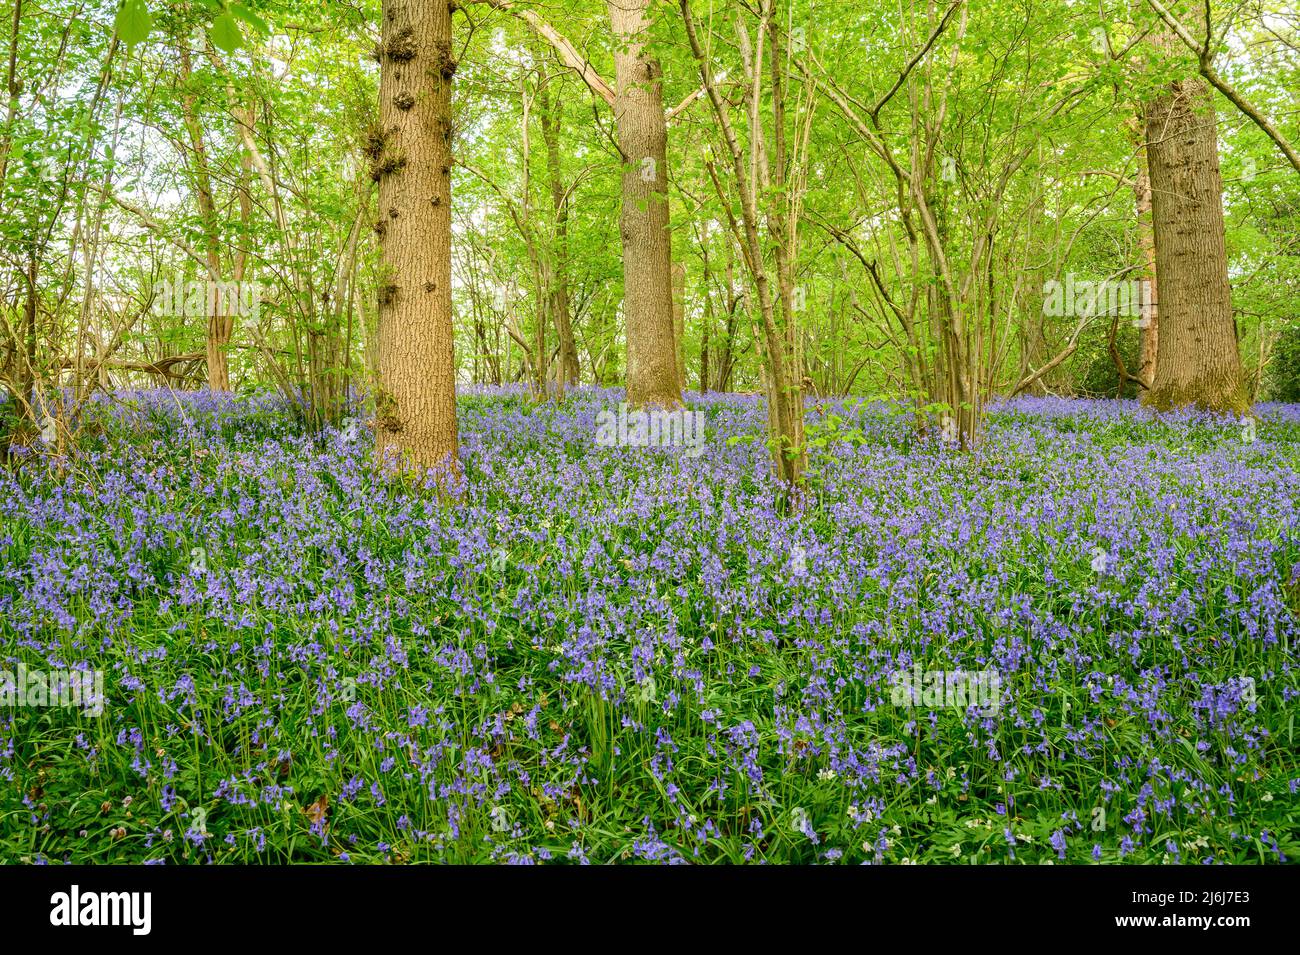 The forest floor is covered in bluebells in a wood on the outskirts of Billingshurst in West Sussex, England. Stock Photo